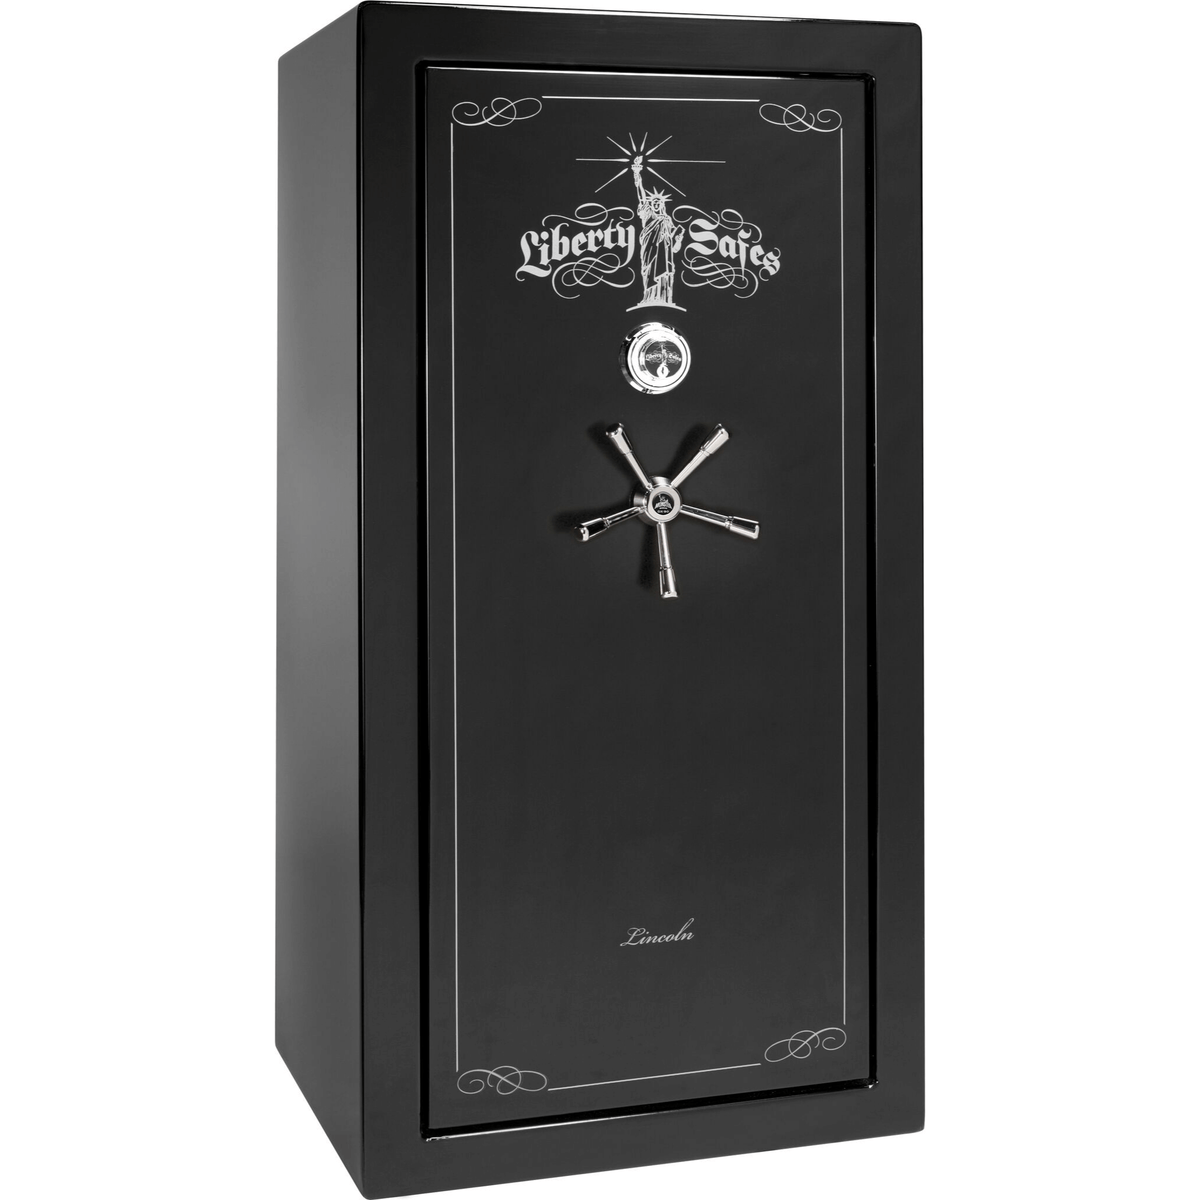 Liberty Lincoln 25 Safe in Black Gloss with Chrome Mechanical Lock.